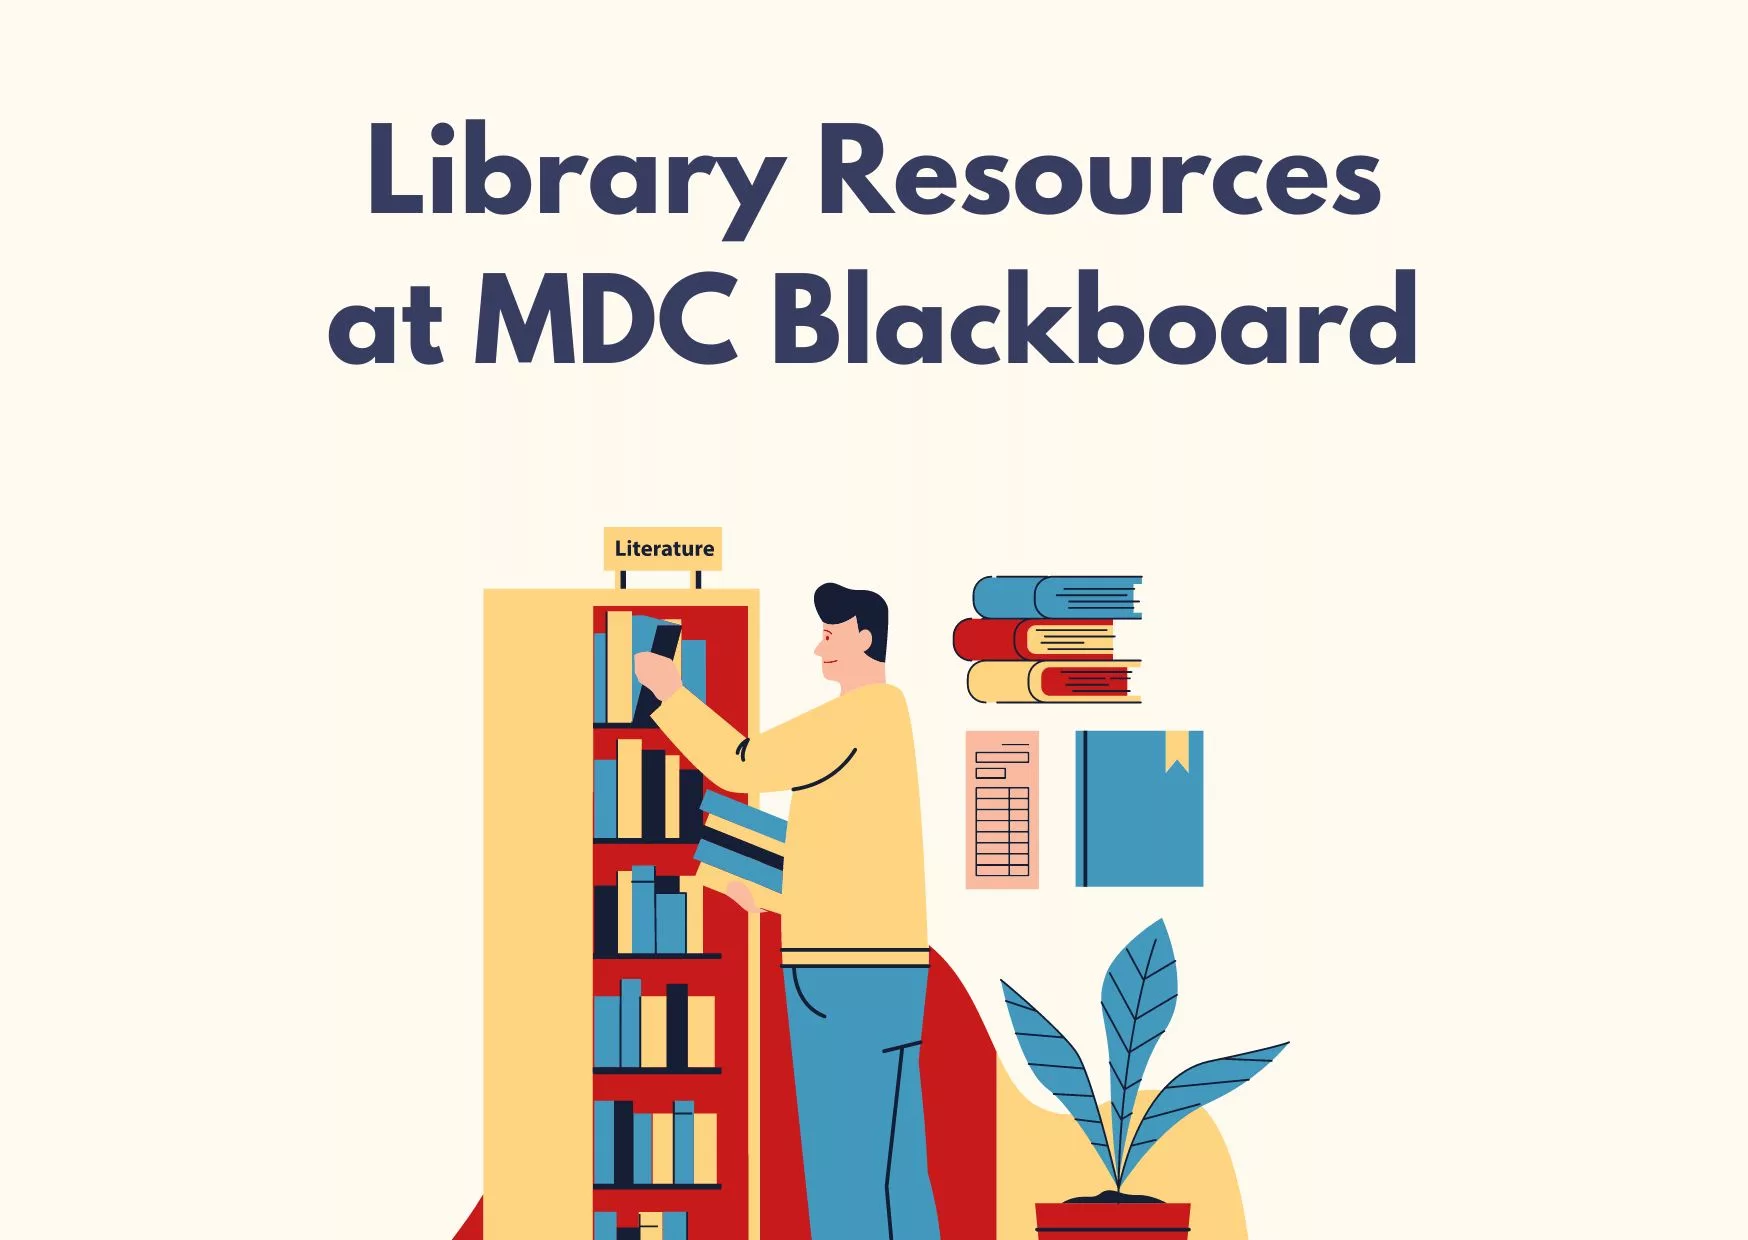 Enhancing Online Education at Miami Dade College with Library Resources